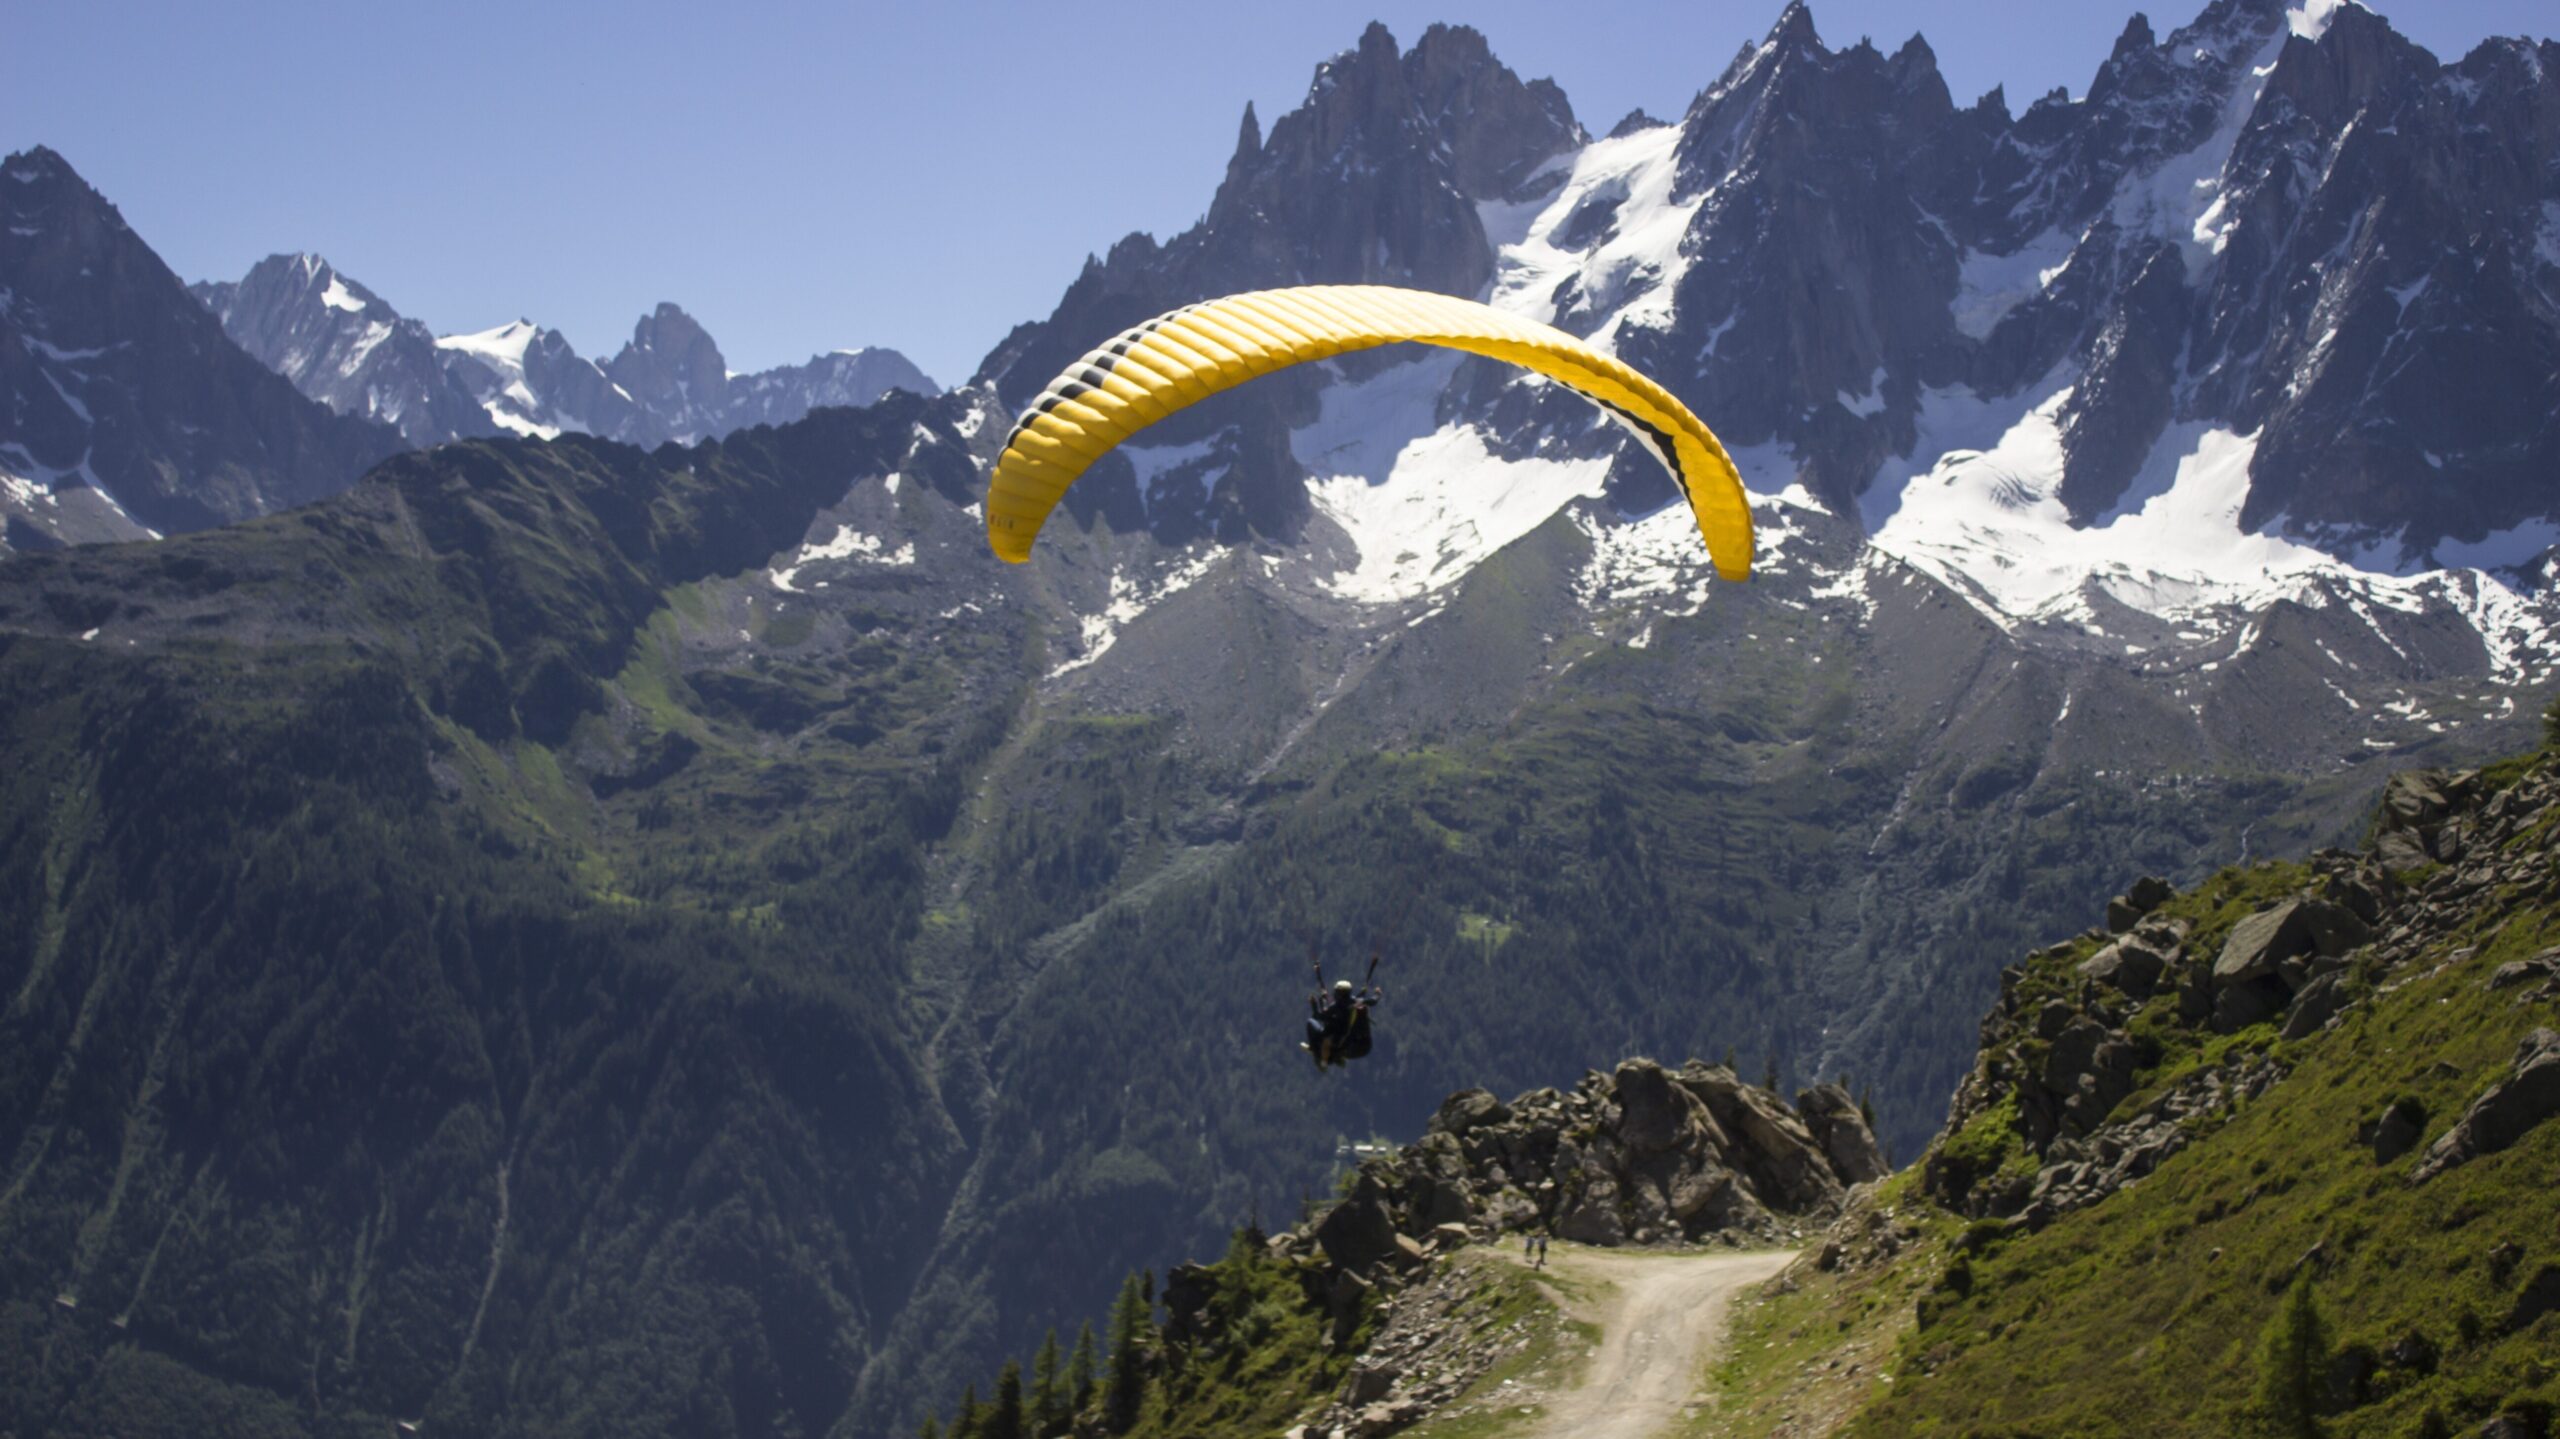 Paragliding at Deolo Hills is worth of money and adventurous activity to do. 